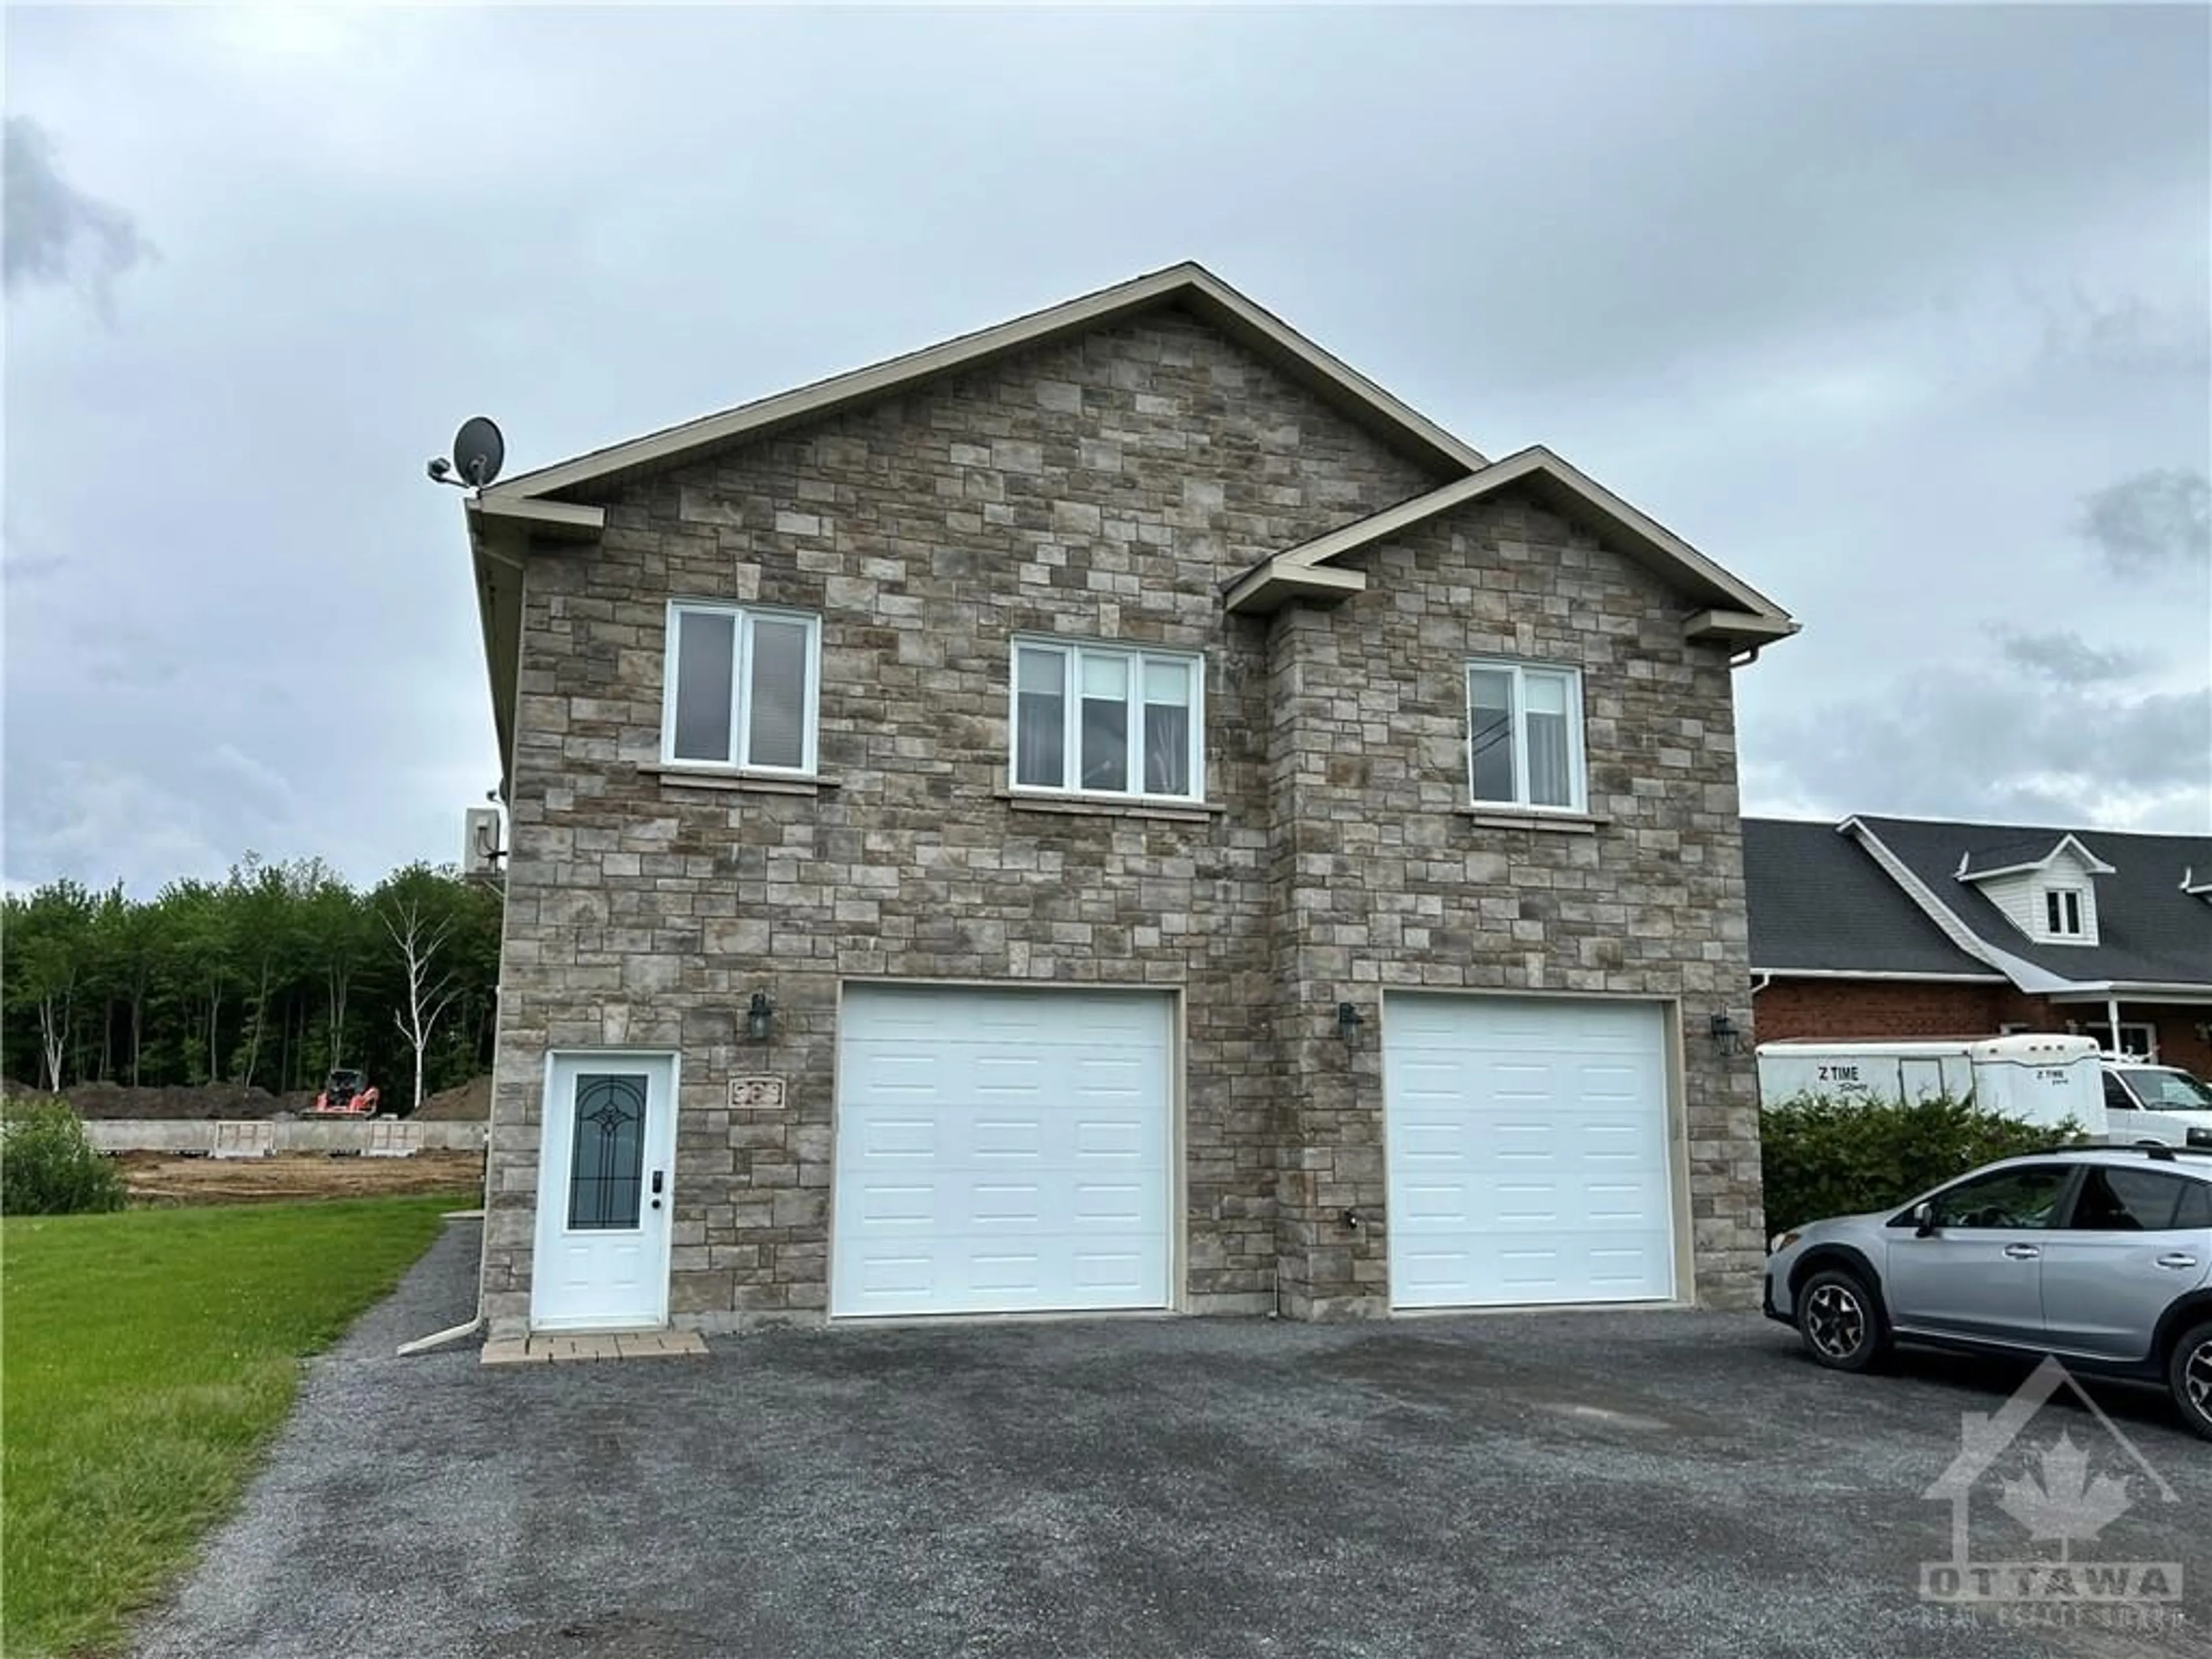 Home with brick exterior material for 568 LIMOGES Rd, Limoges Ontario K0A 2M0